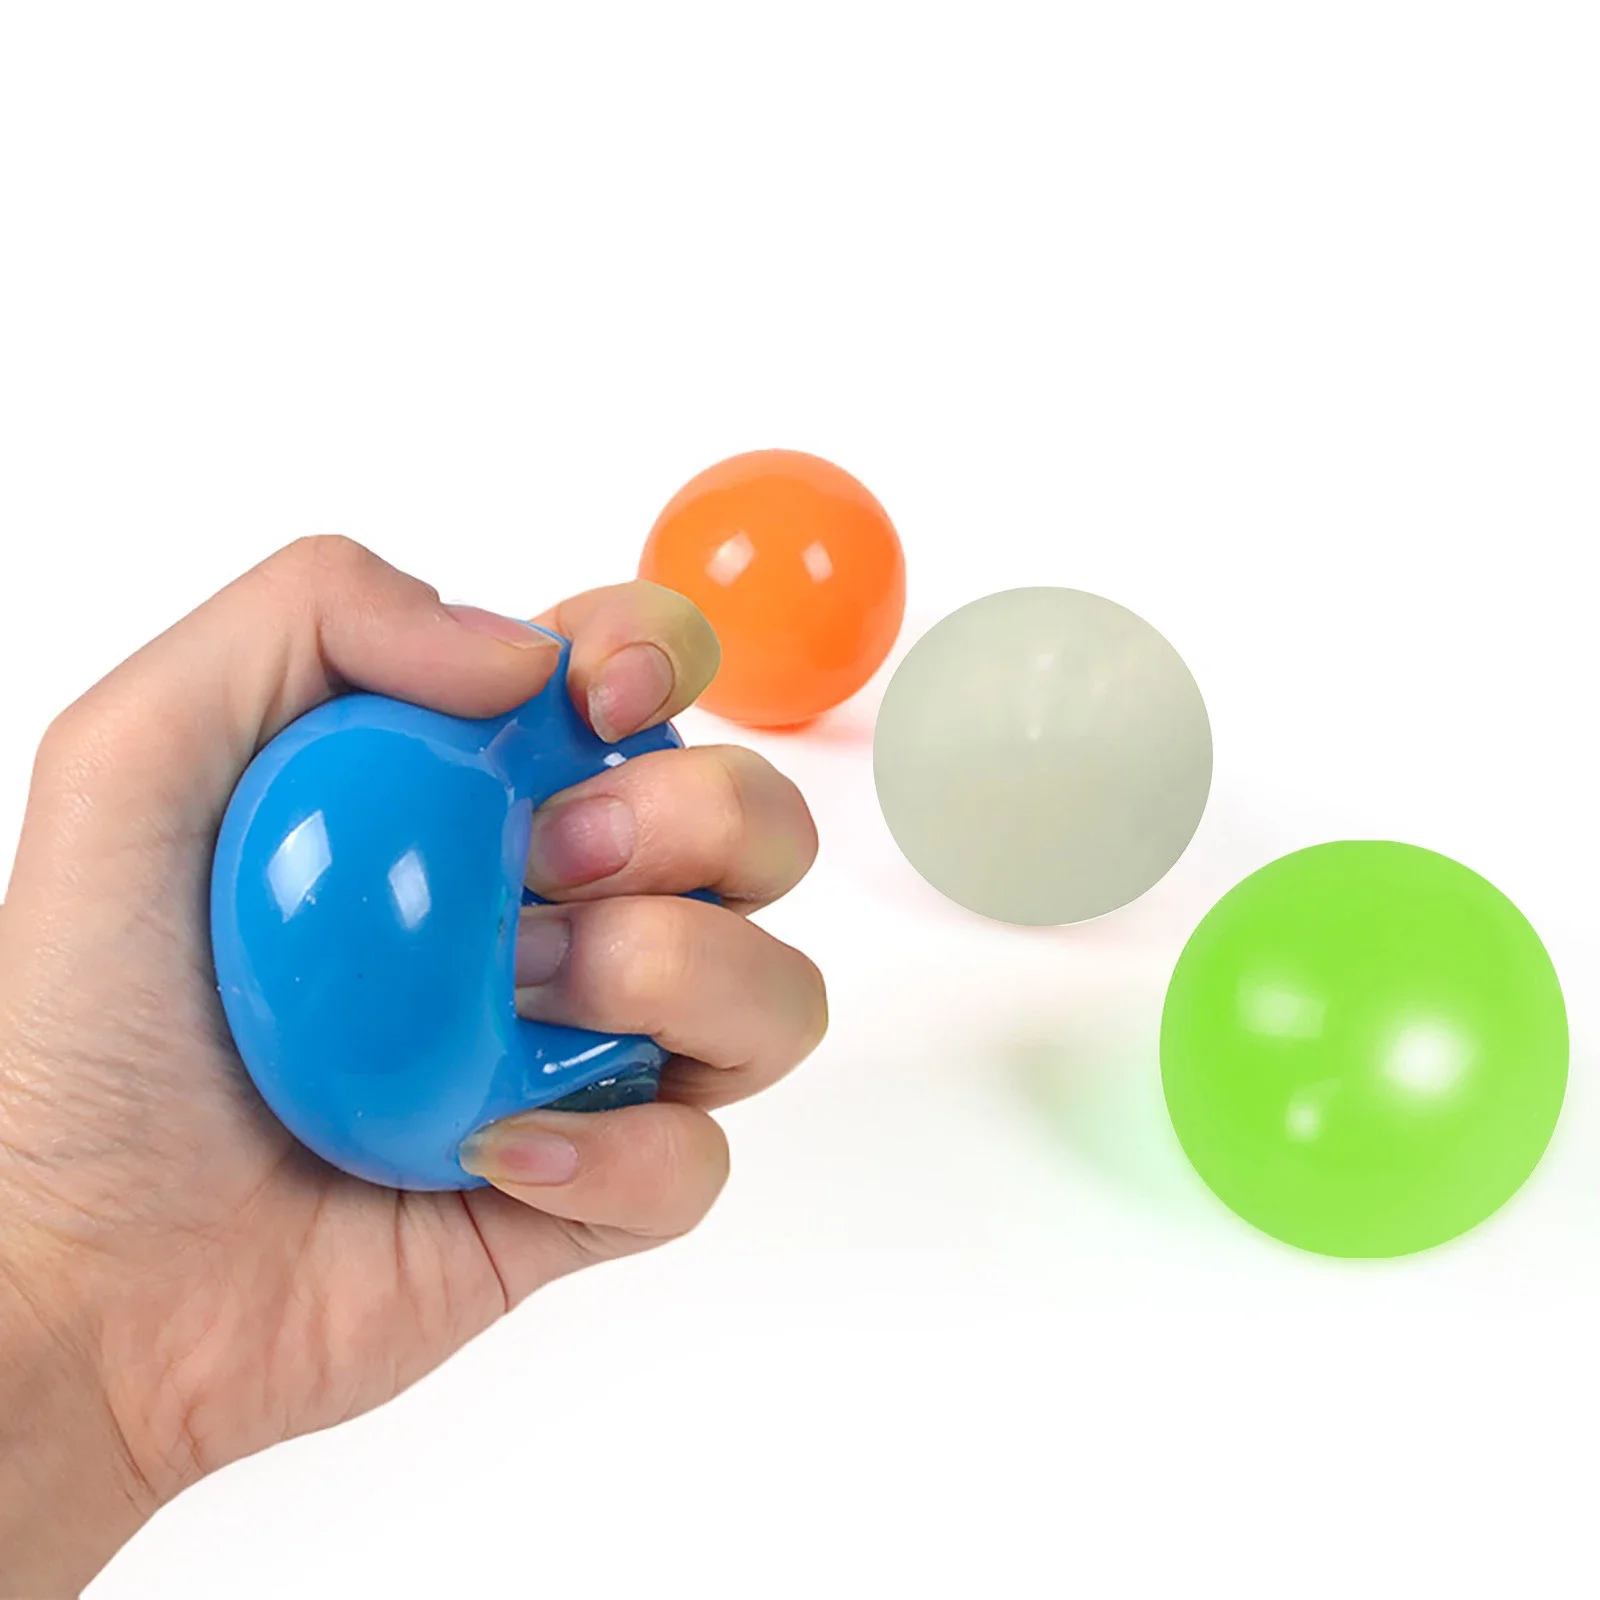 Fidget-Toys Gift-Pack Anti-Stress-Set Pop-It Stretchy-Strings Squishy Relief Sensory img3